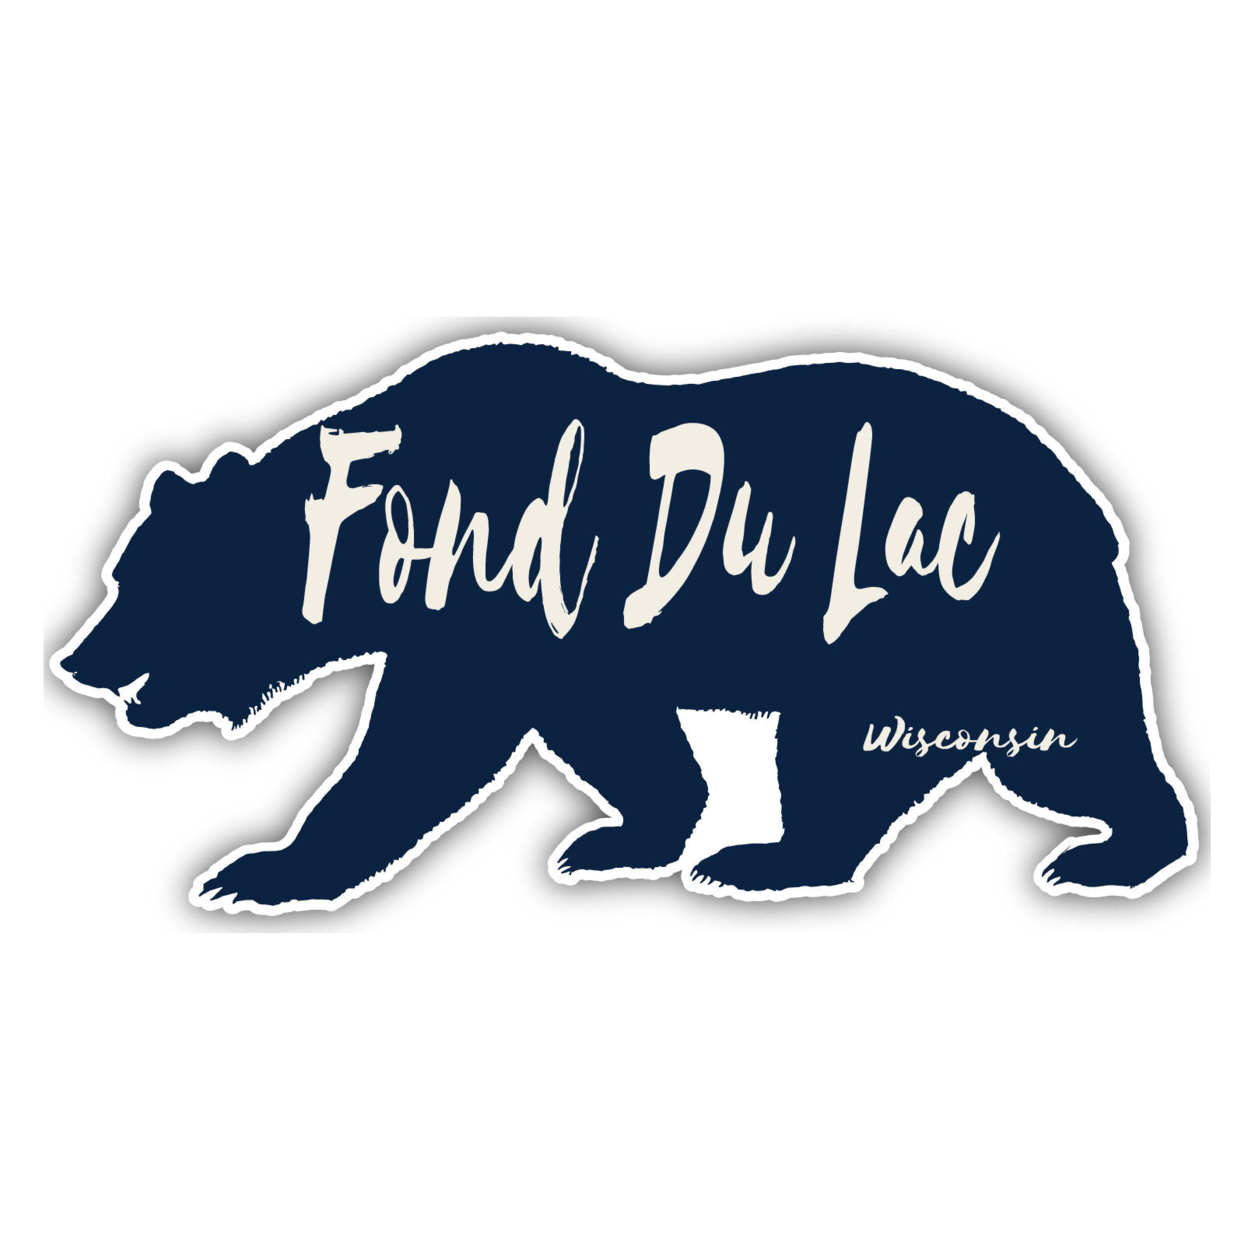 Fond Du Lac Wisconsin Souvenir Decorative Stickers (Choose Theme And Size) - 4-Pack, 4-Inch, Bear